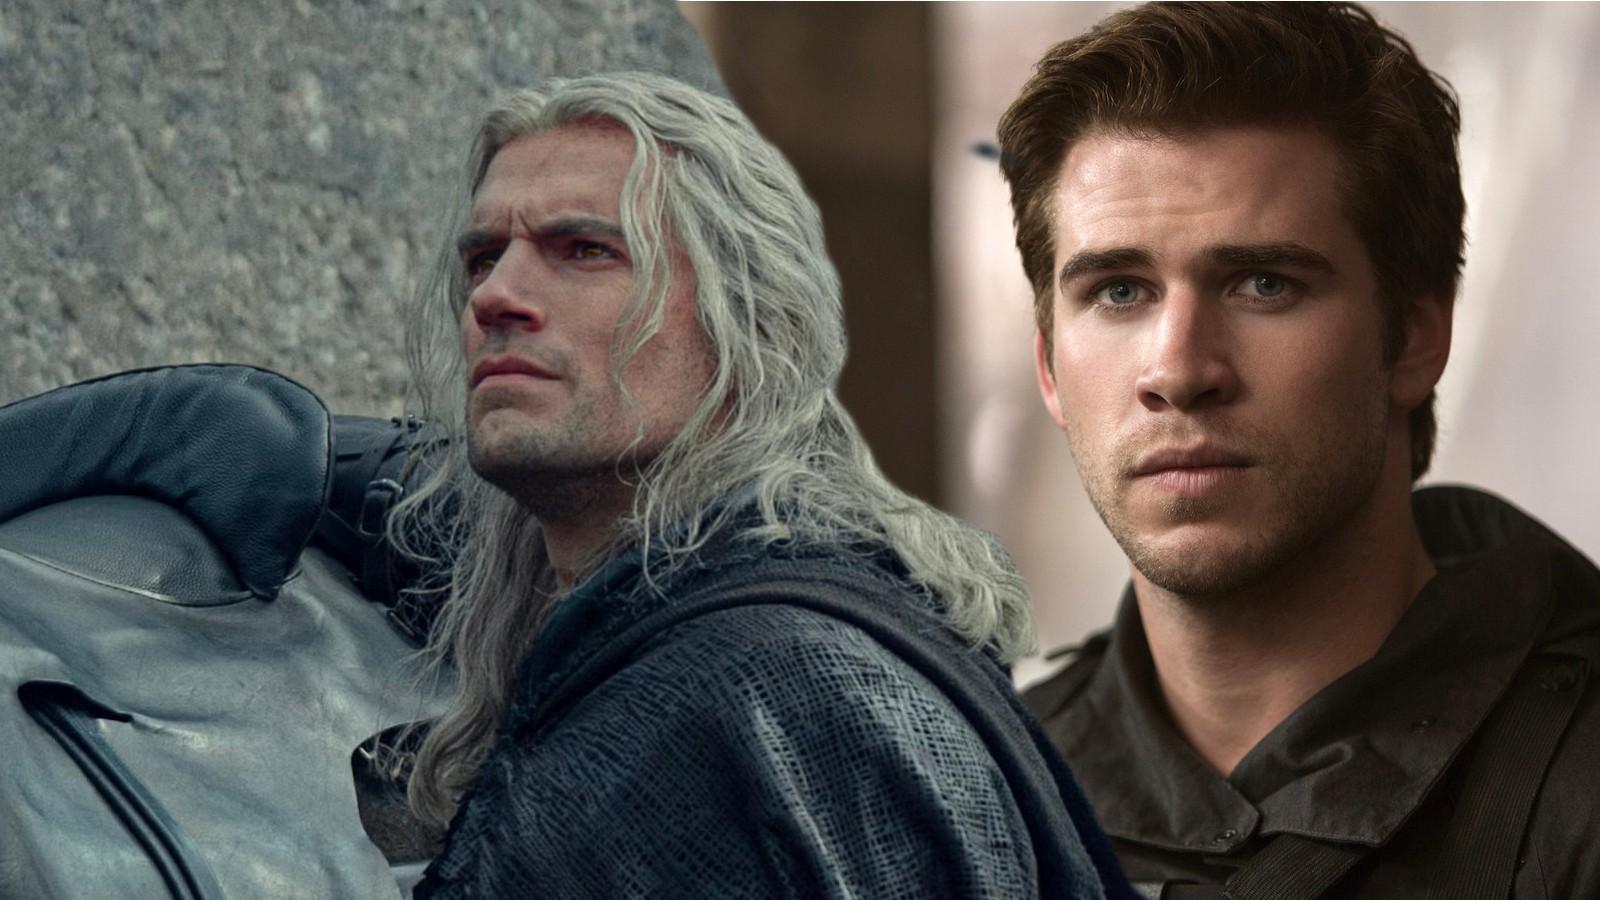 The Witcher' Season 3 Trailer Is Bittersweet For Henry Cavill Fans